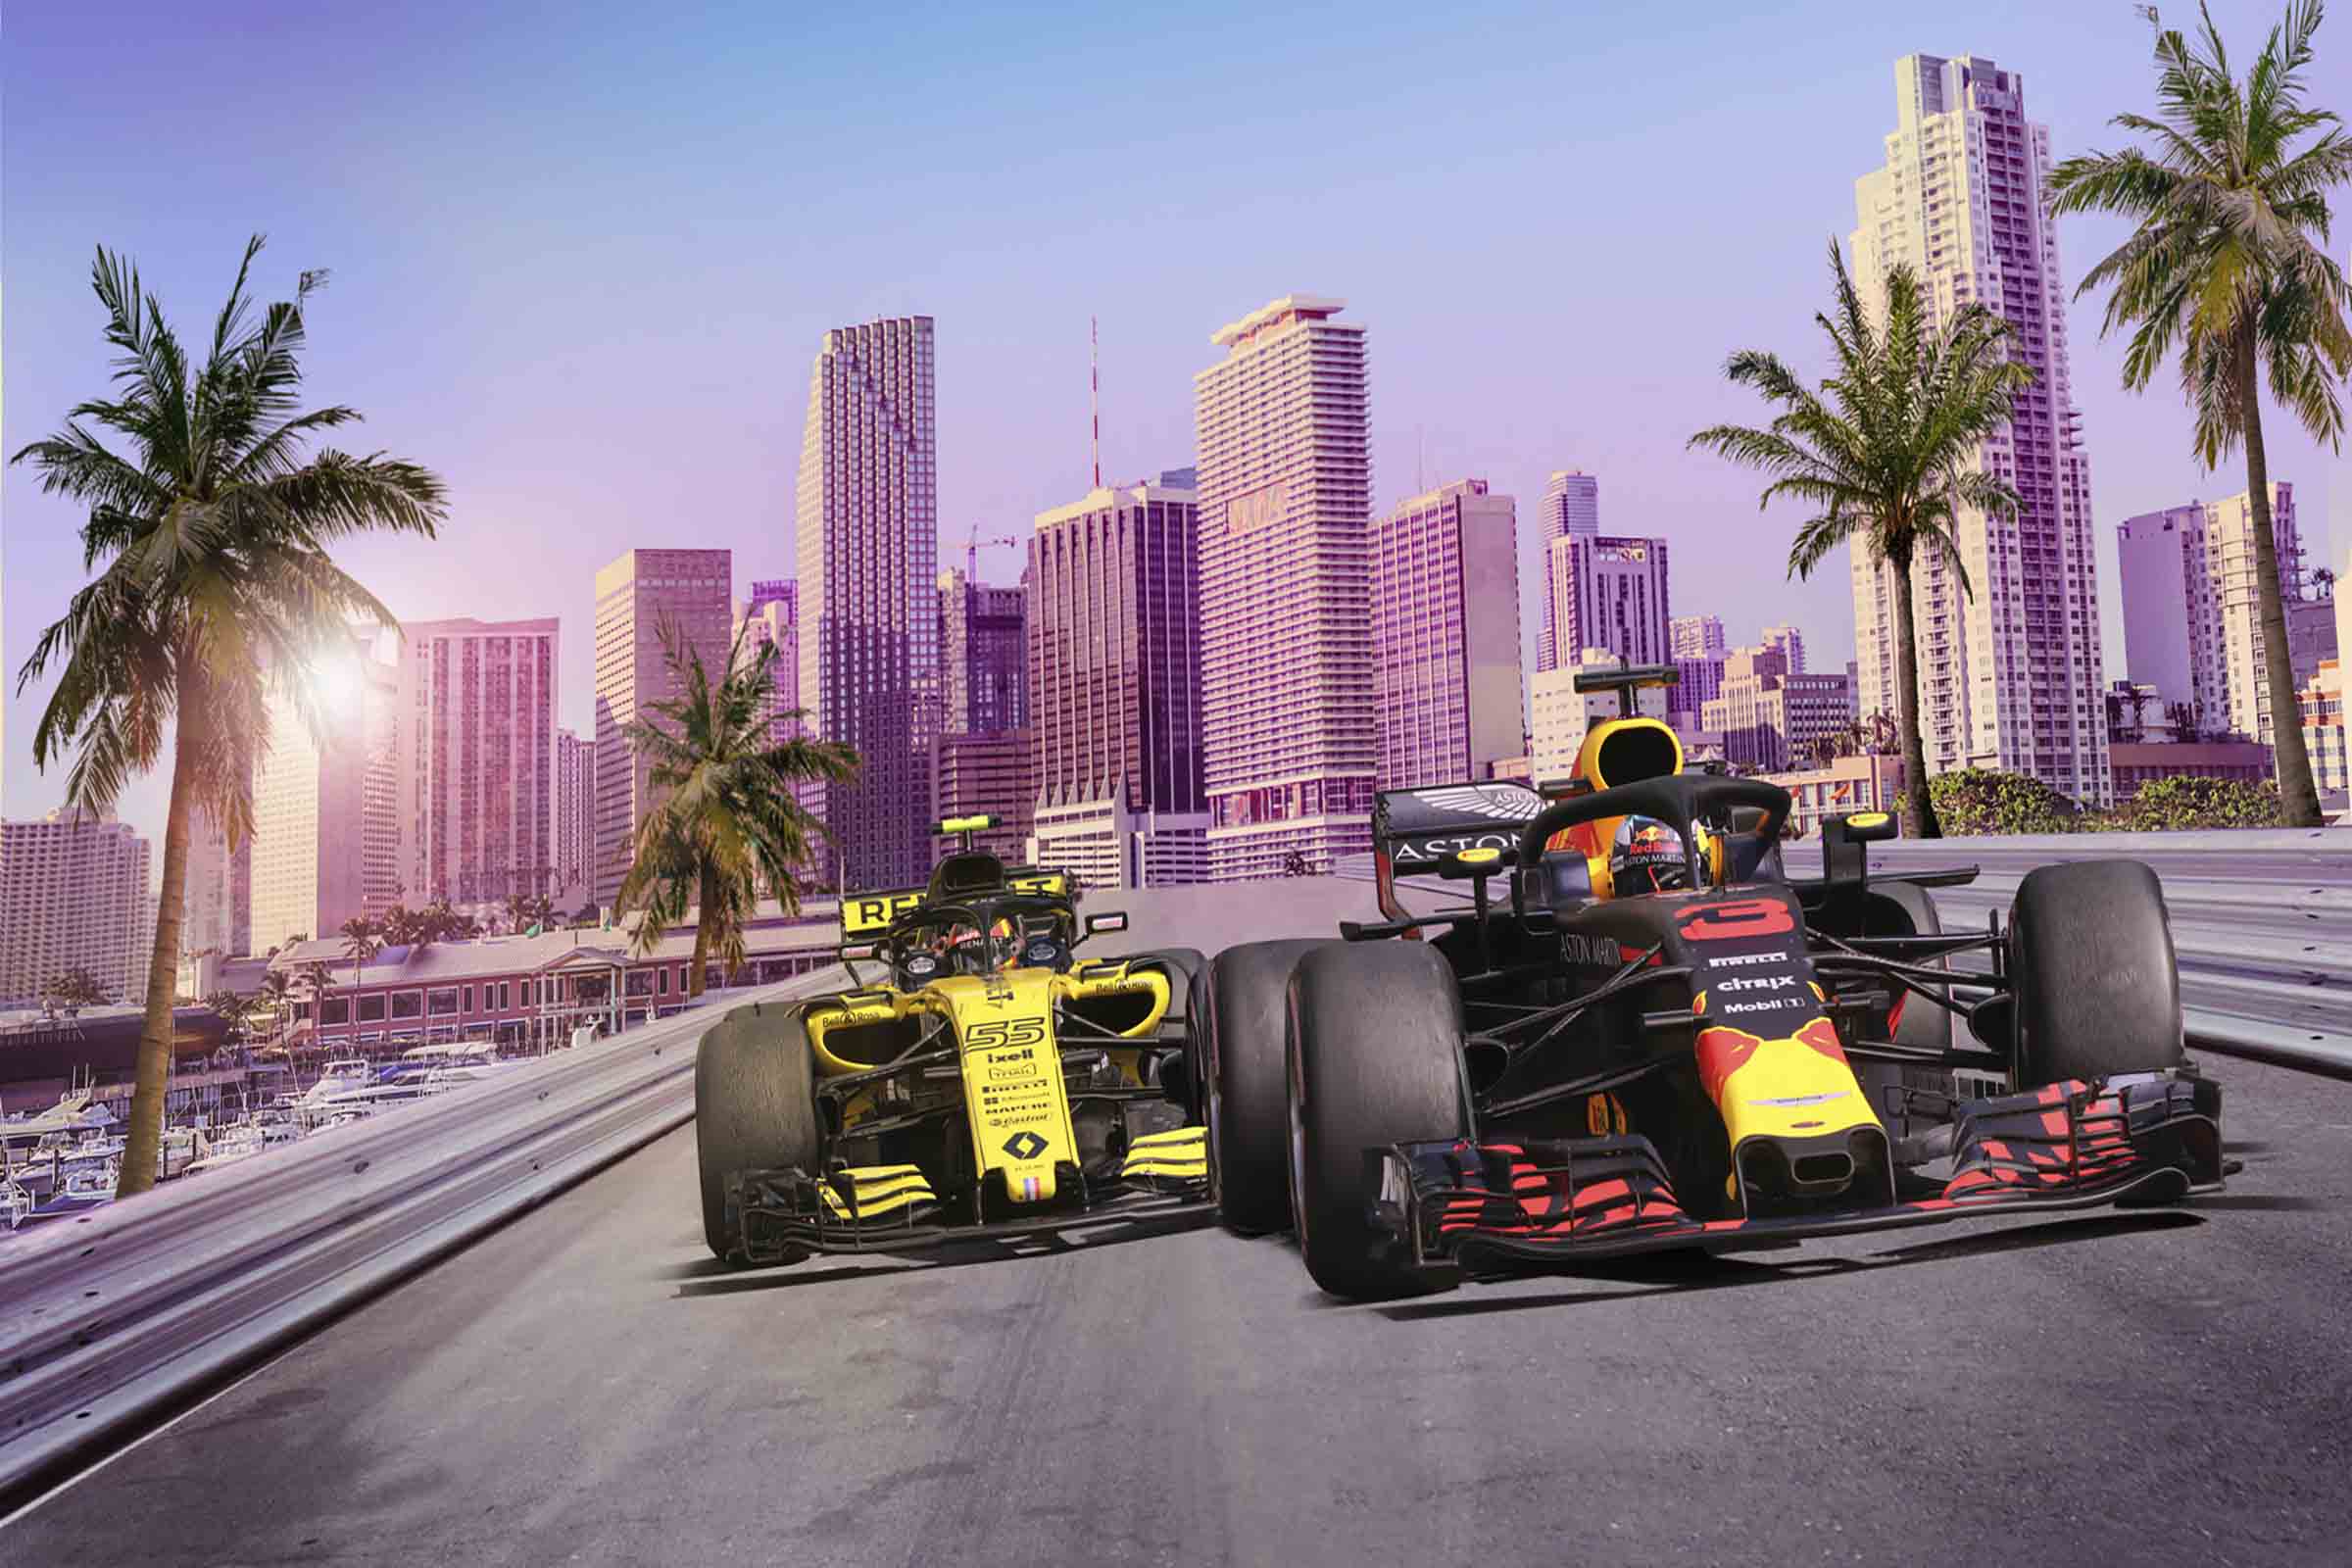 Step Aside, Art Basel. The Miami Grand Prix Has Arrived